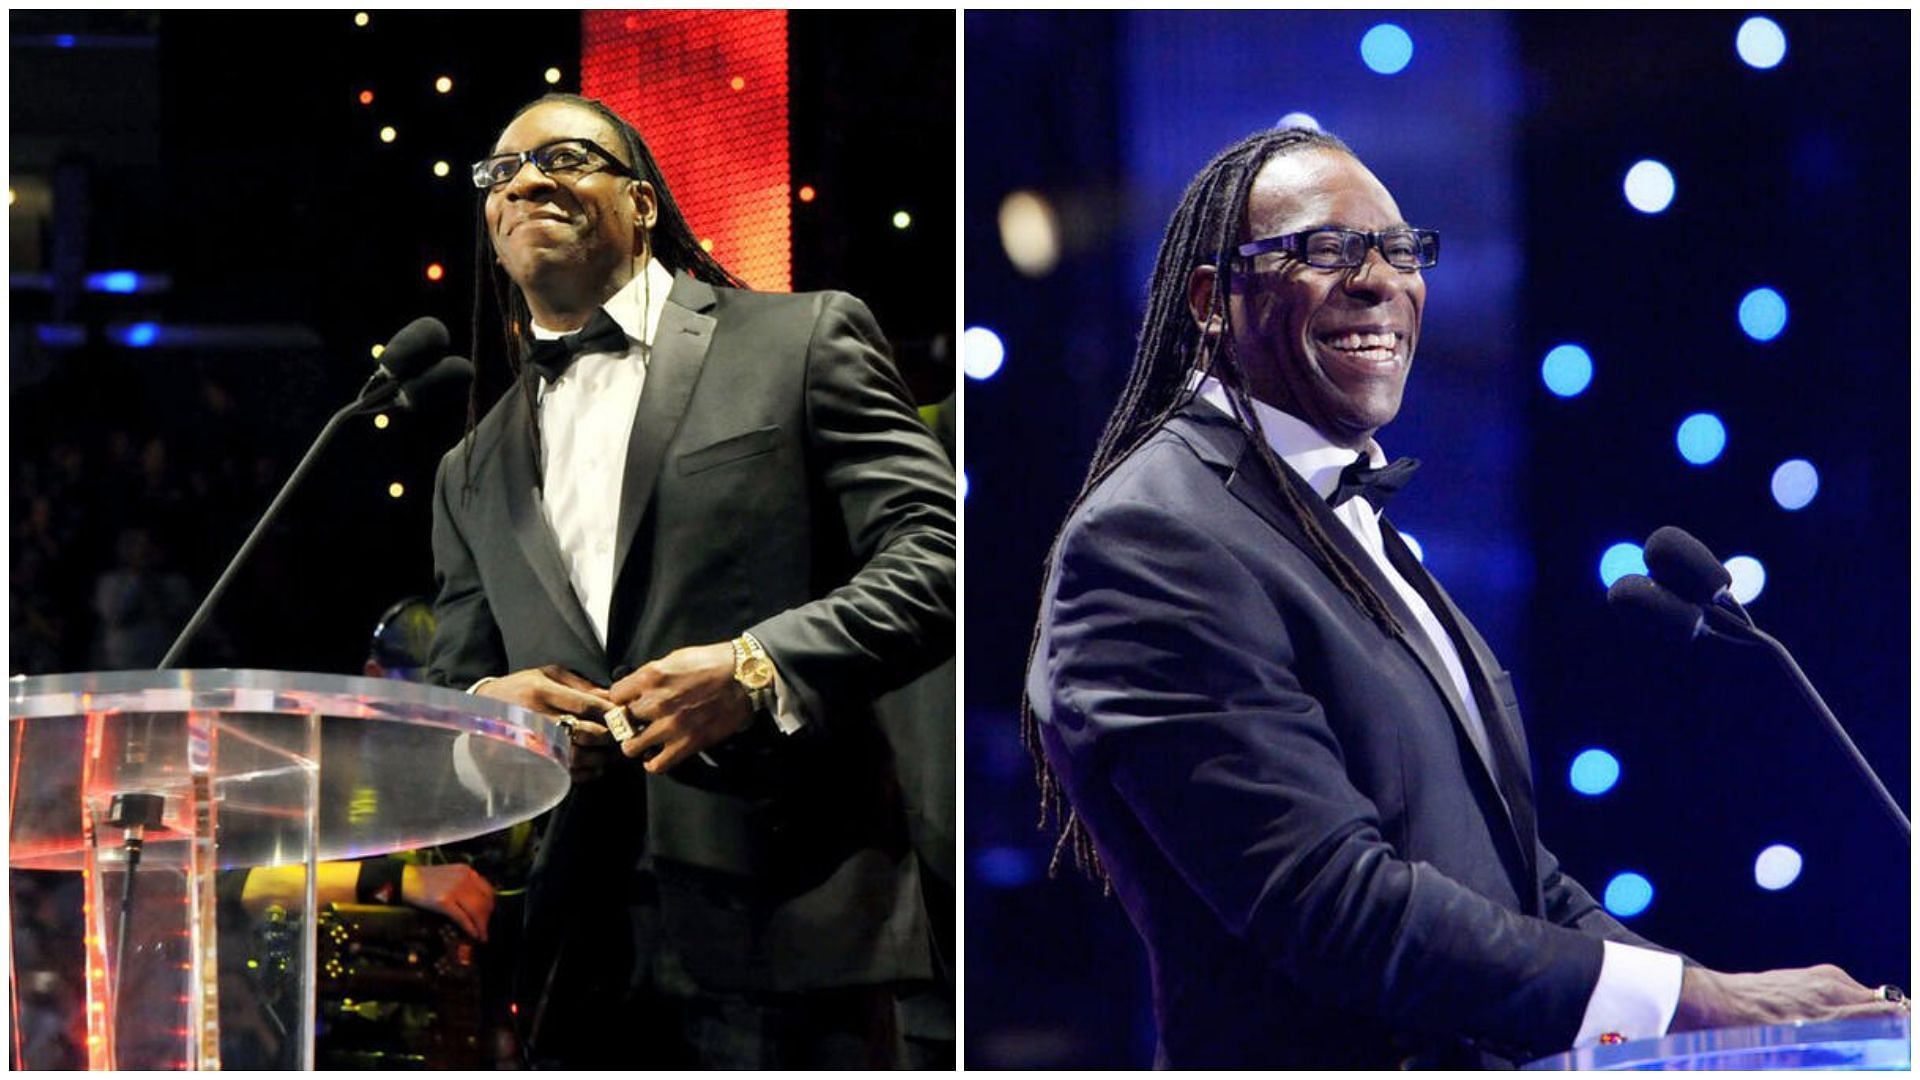 Booker T is a WWE Hall of Famer.